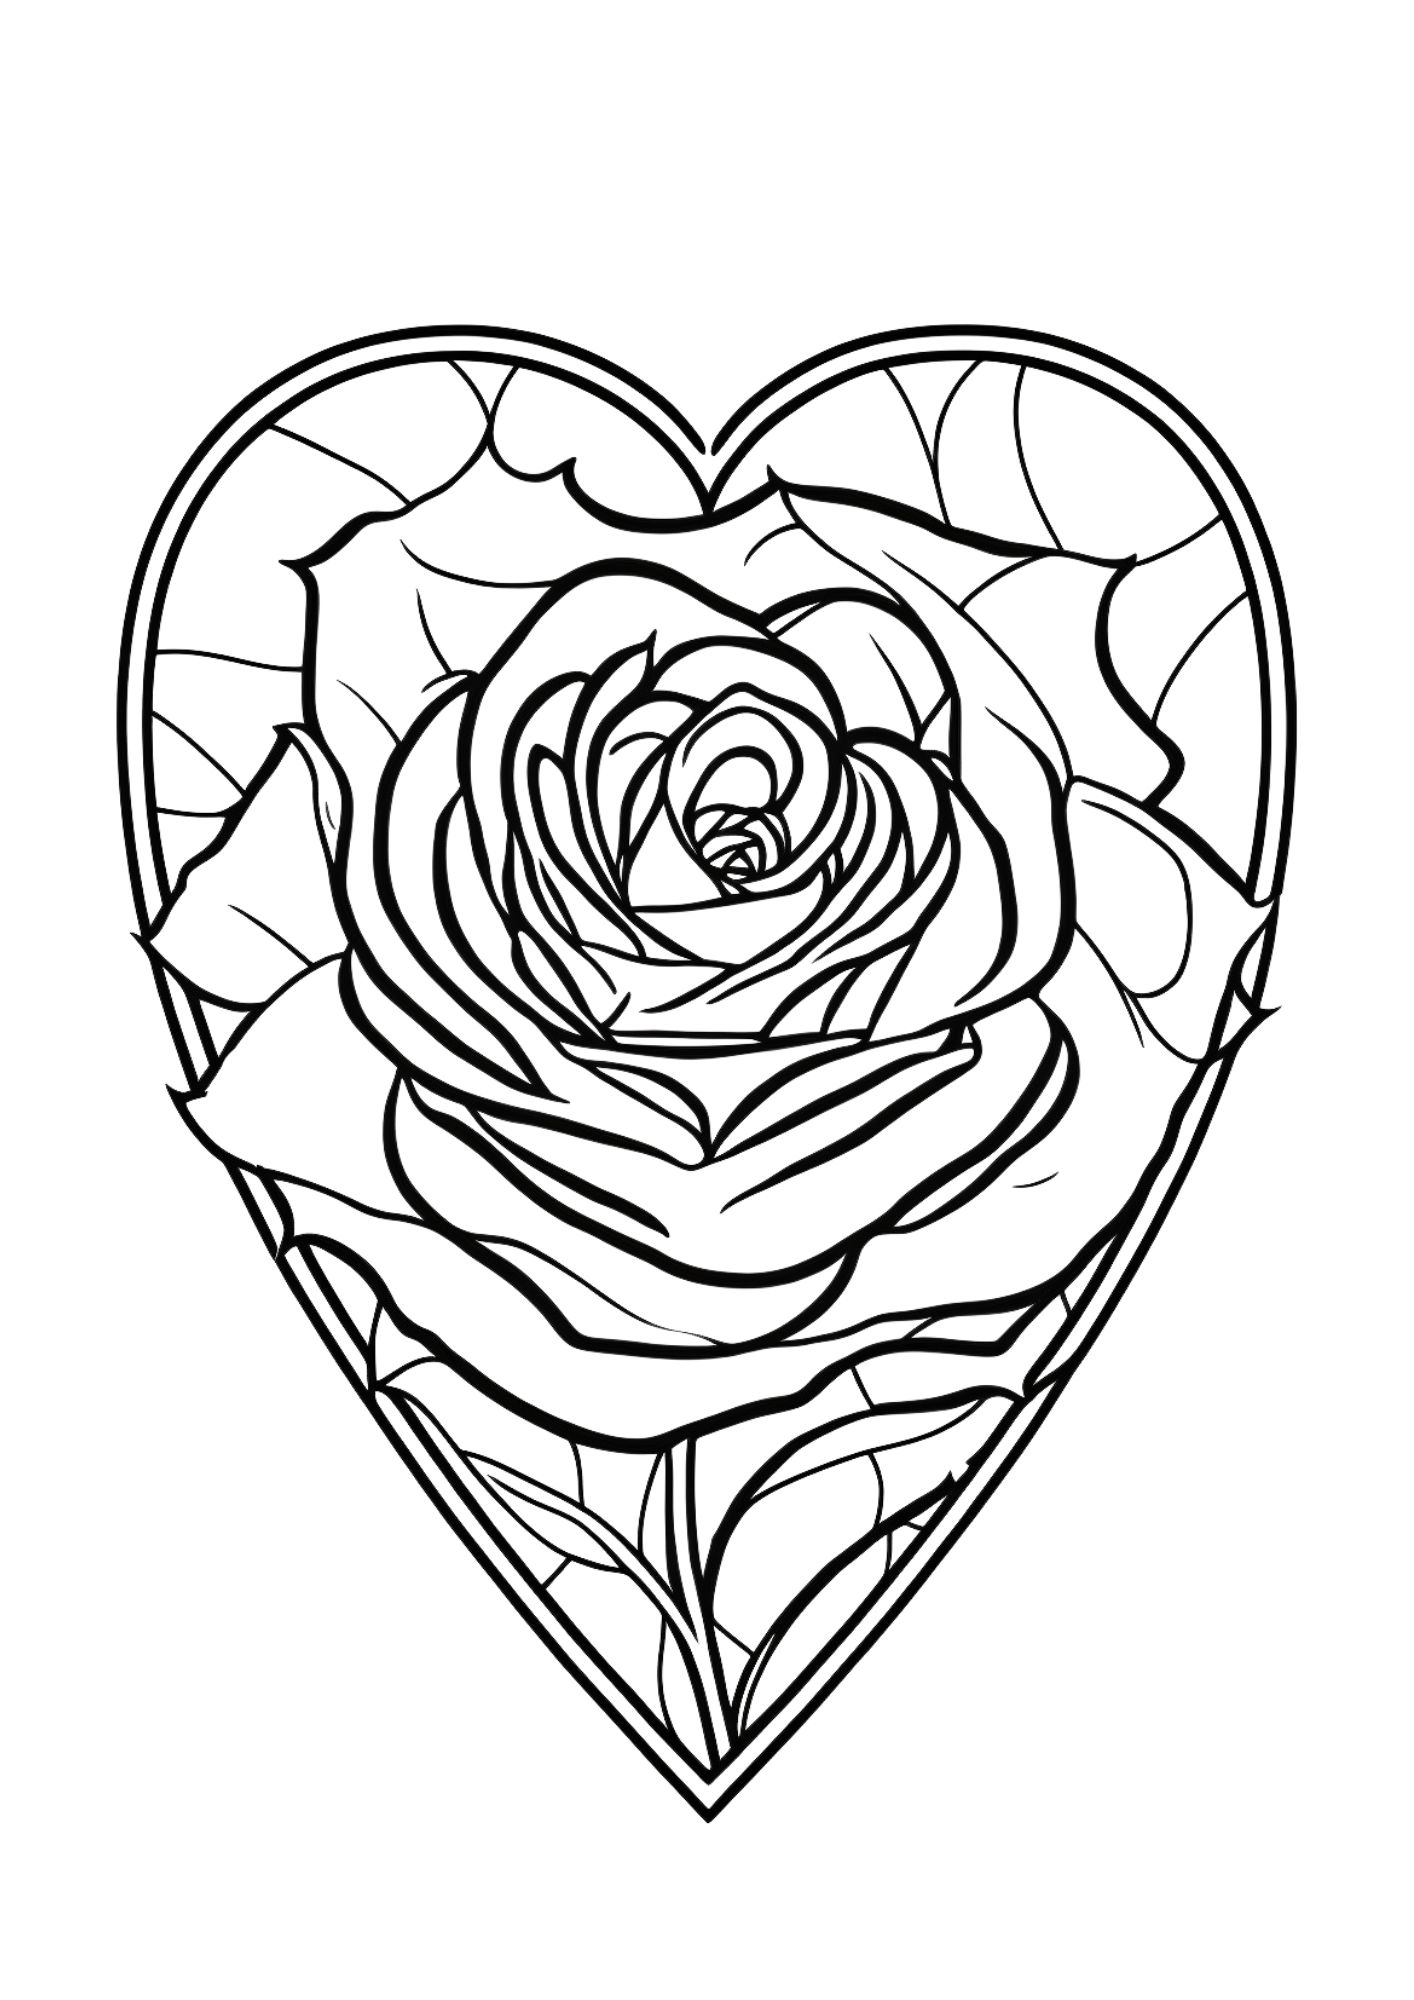 Free printable roses coloring pages for adults and kids